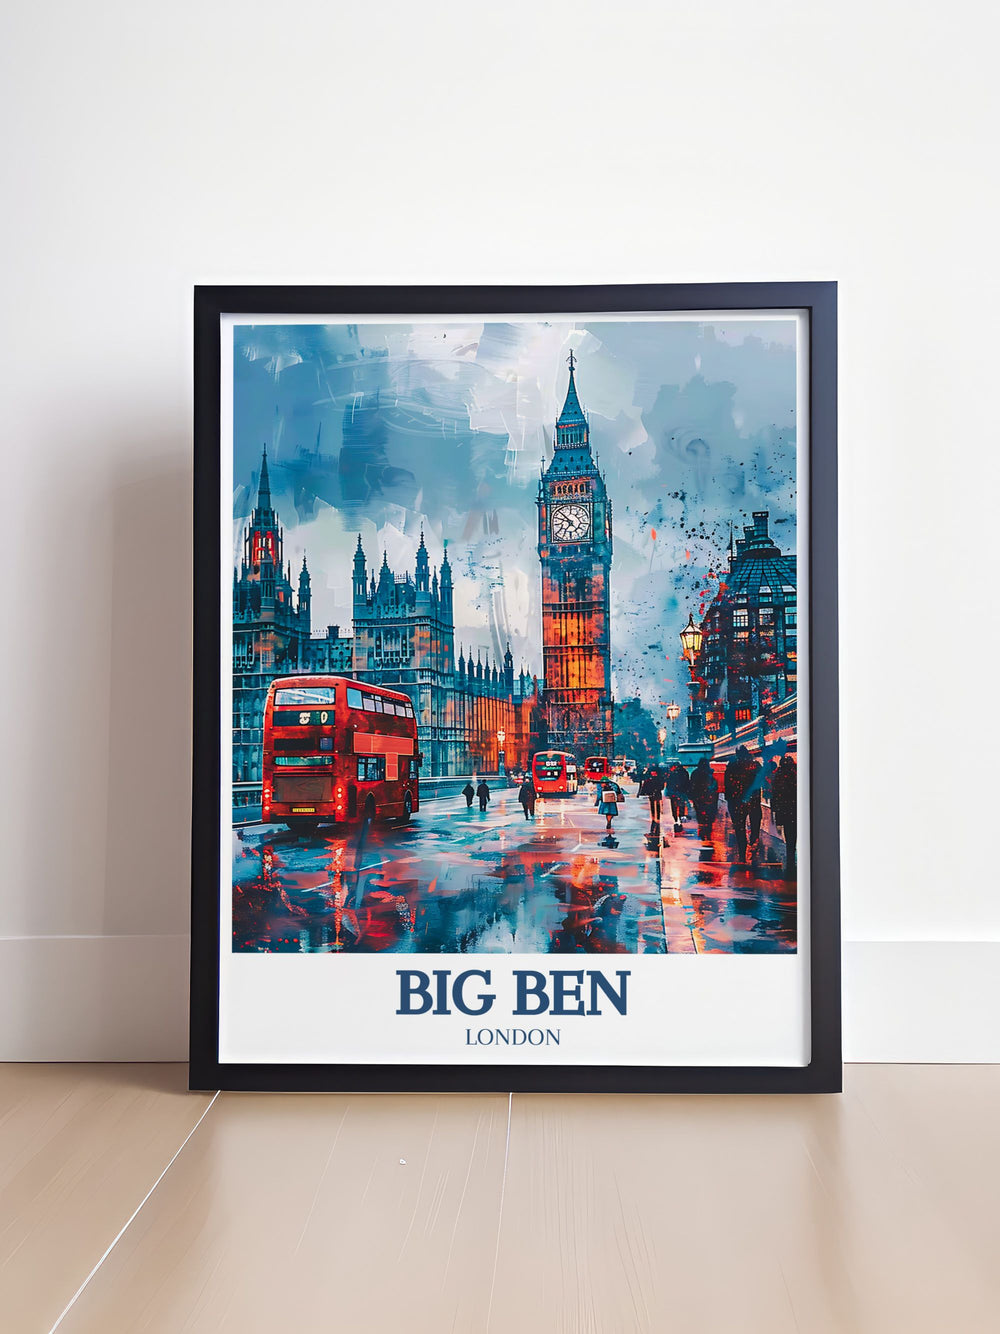 High quality print of Big Ben, Westminster Bridge, and the River Thames in London, capturing the stunning landmarks and serene river views of this historic city. Ideal for art lovers who appreciate both architecture and nature.